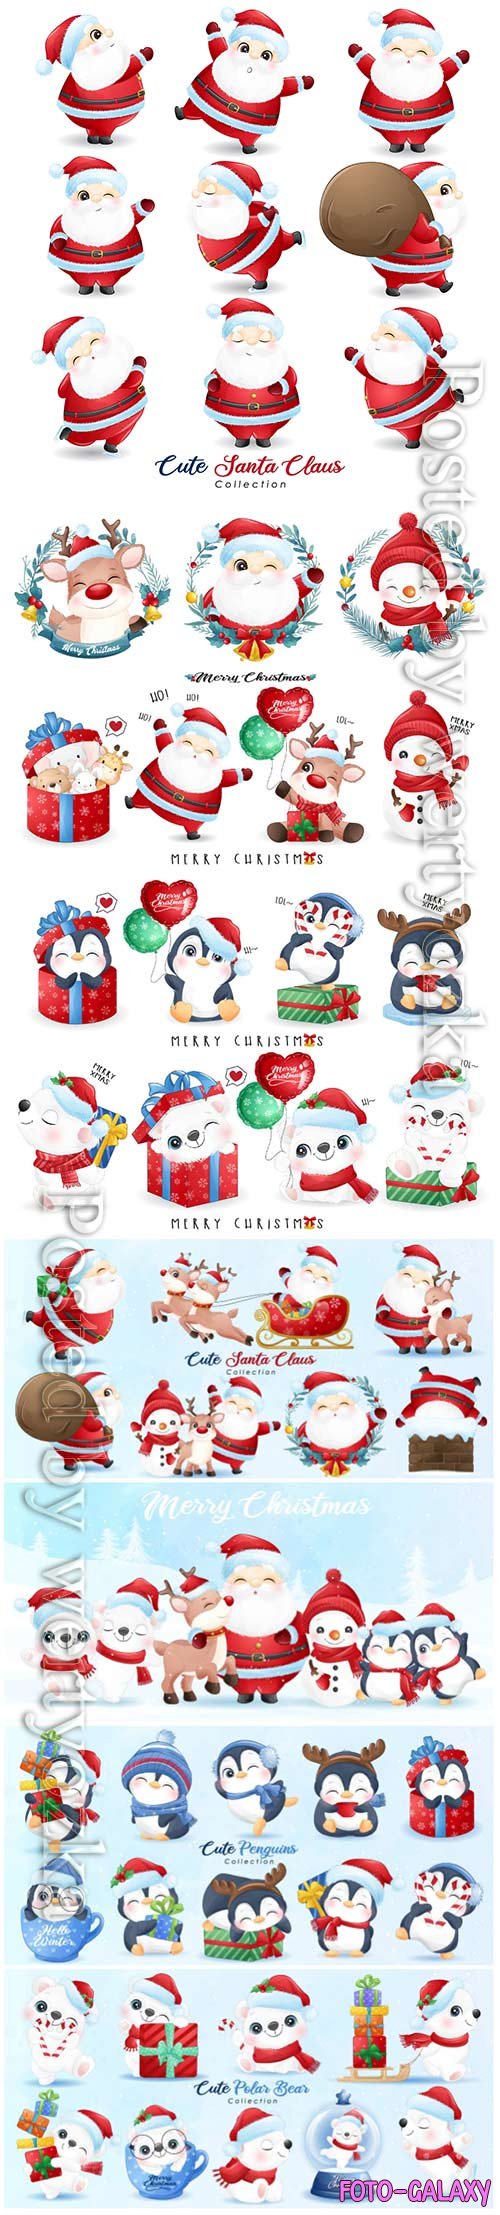 Cute santa claus and friends for christmas day with watercolor vector illustration